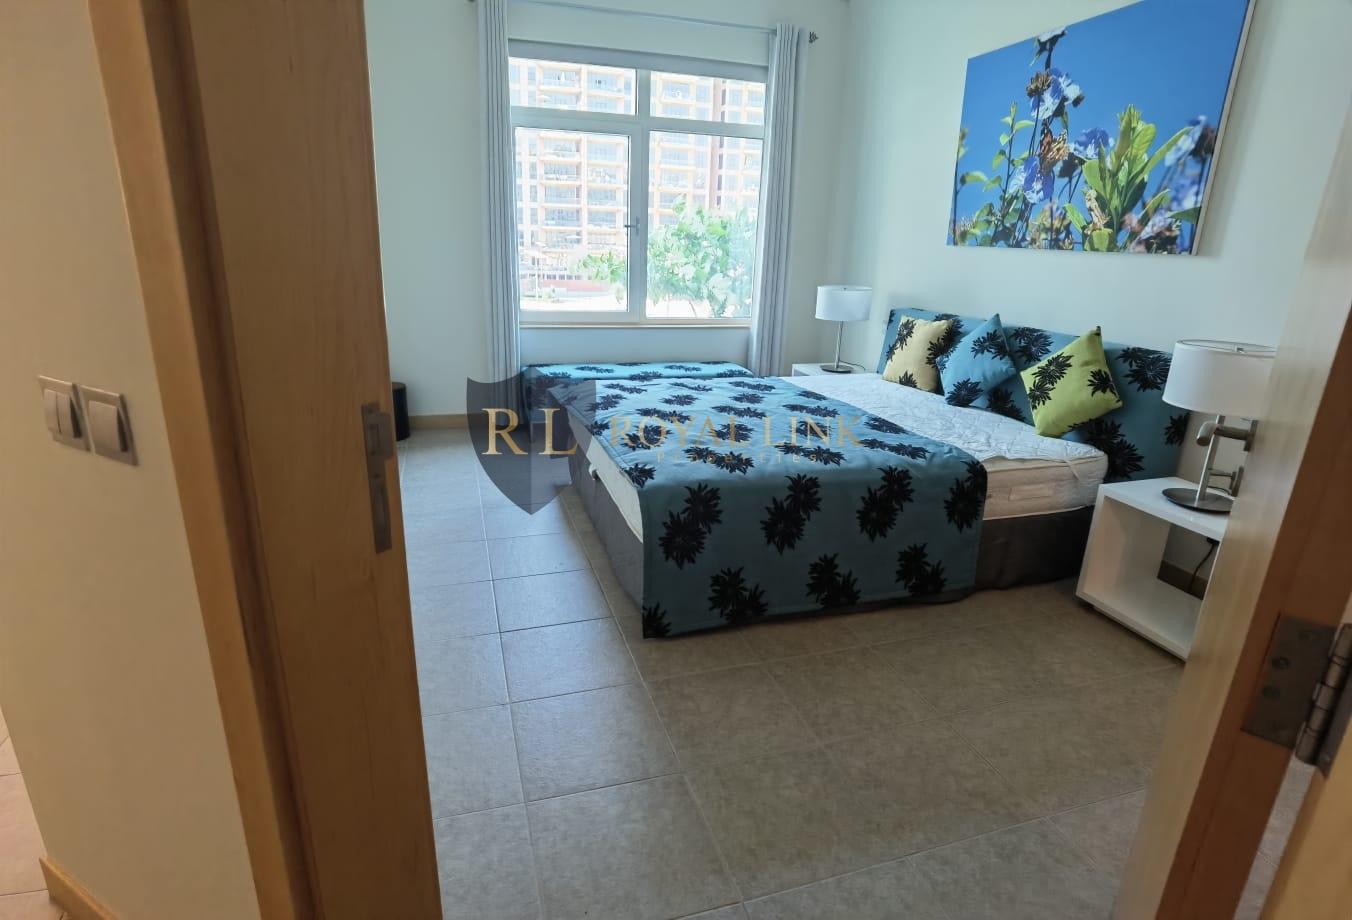 2 bed, 3 bath Apartment for rent in Al Das, Shoreline Apartments, Palm Jumeirah, Dubai for price AED 210000 yearly 